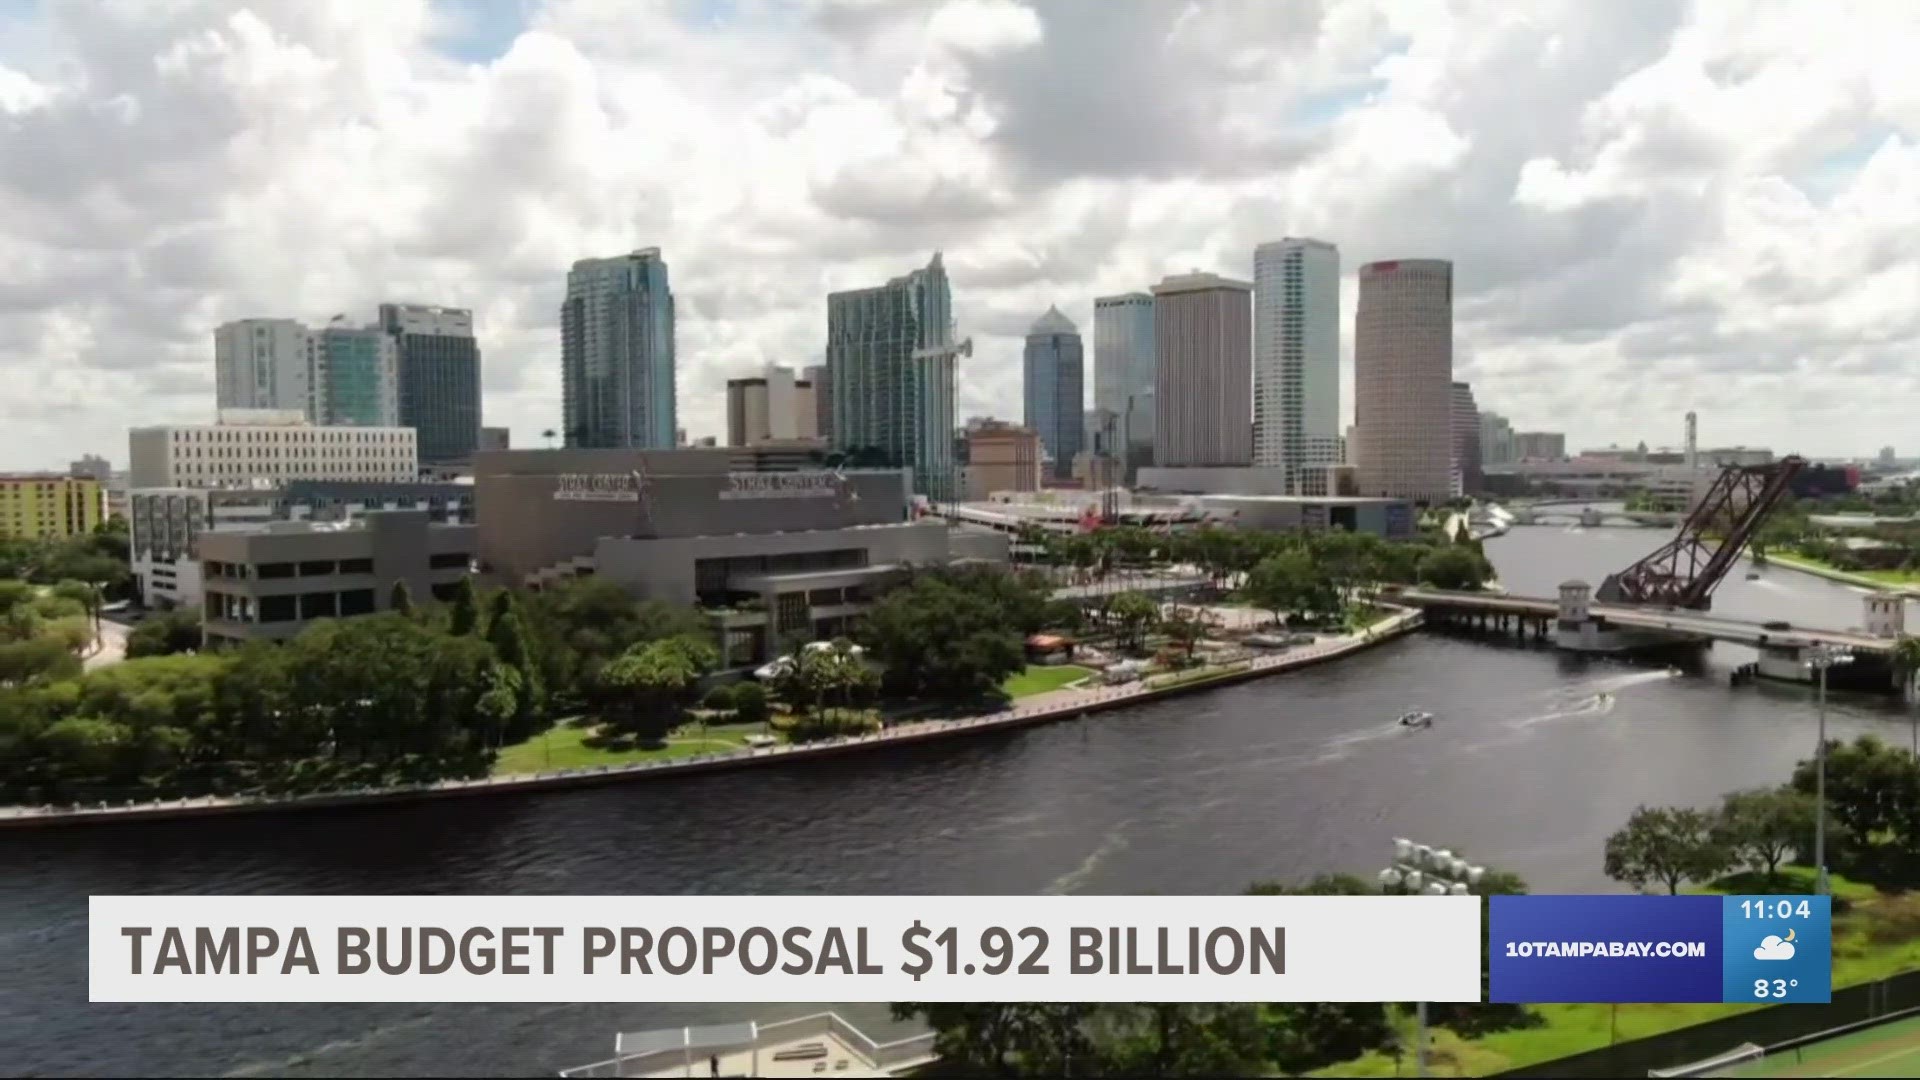 Tampa Mayor Jane Castor proposed raising the mileage by 1.0 which would increase taxes for those living in Tampa.